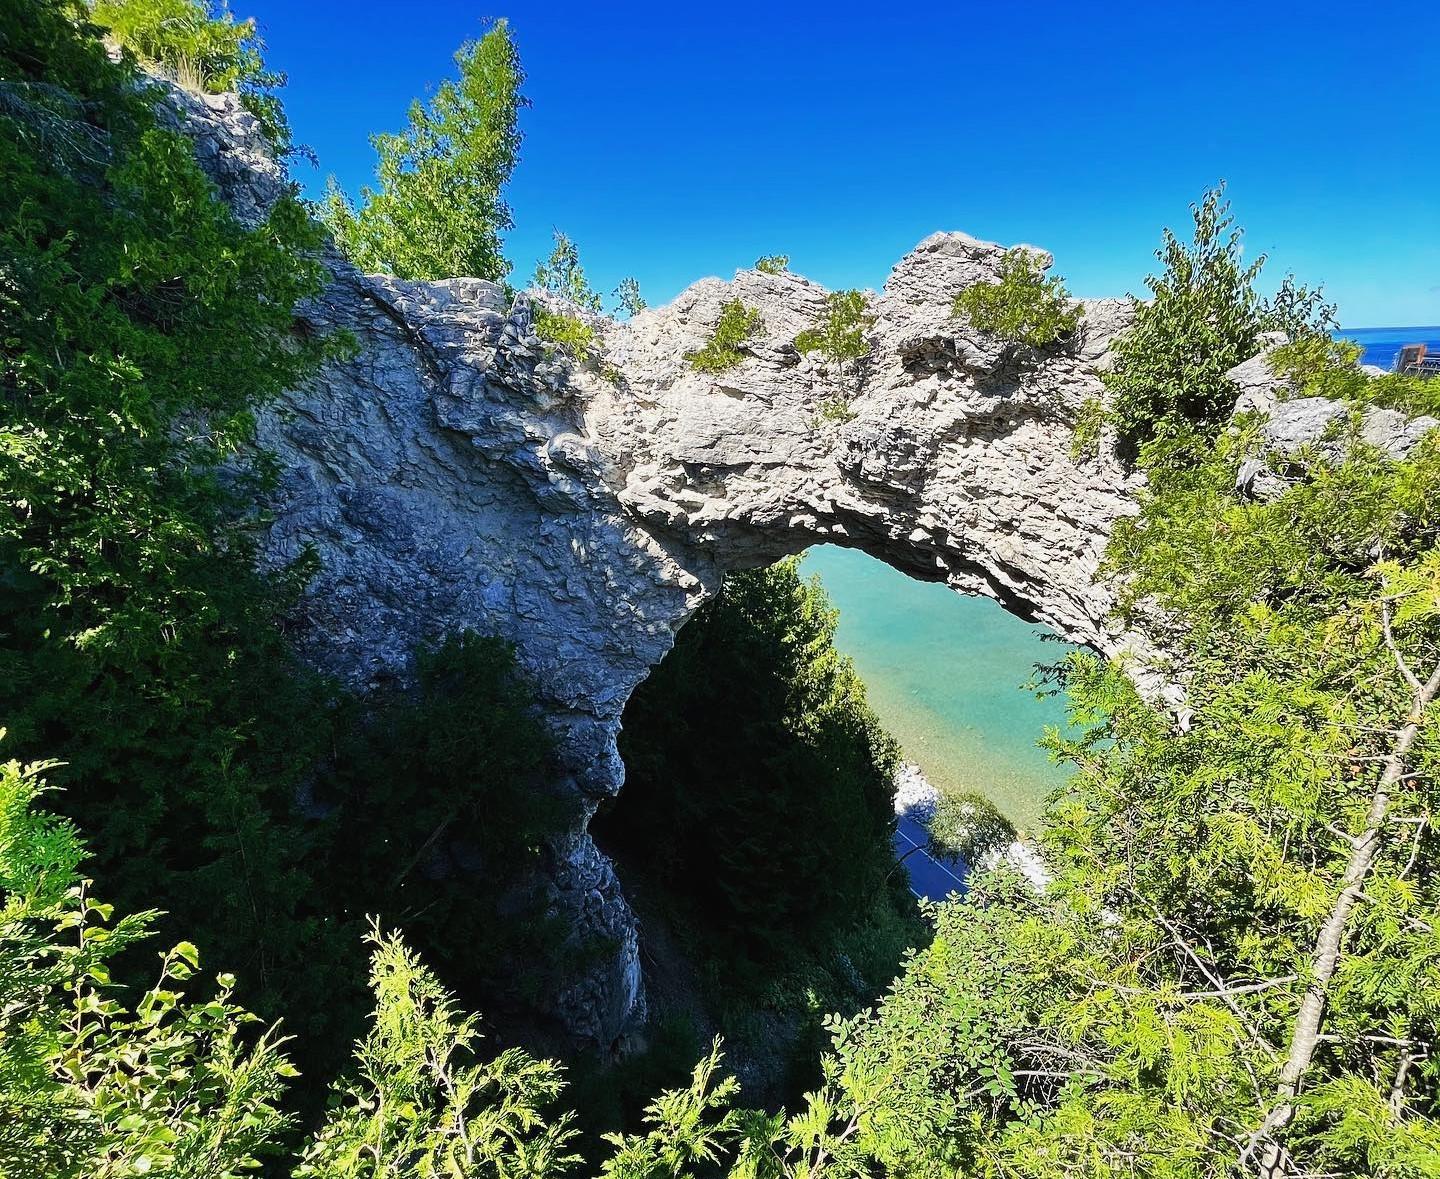 Mackinac Island’s Arch Rock frames the road and water below with bright blue sky above and green trees